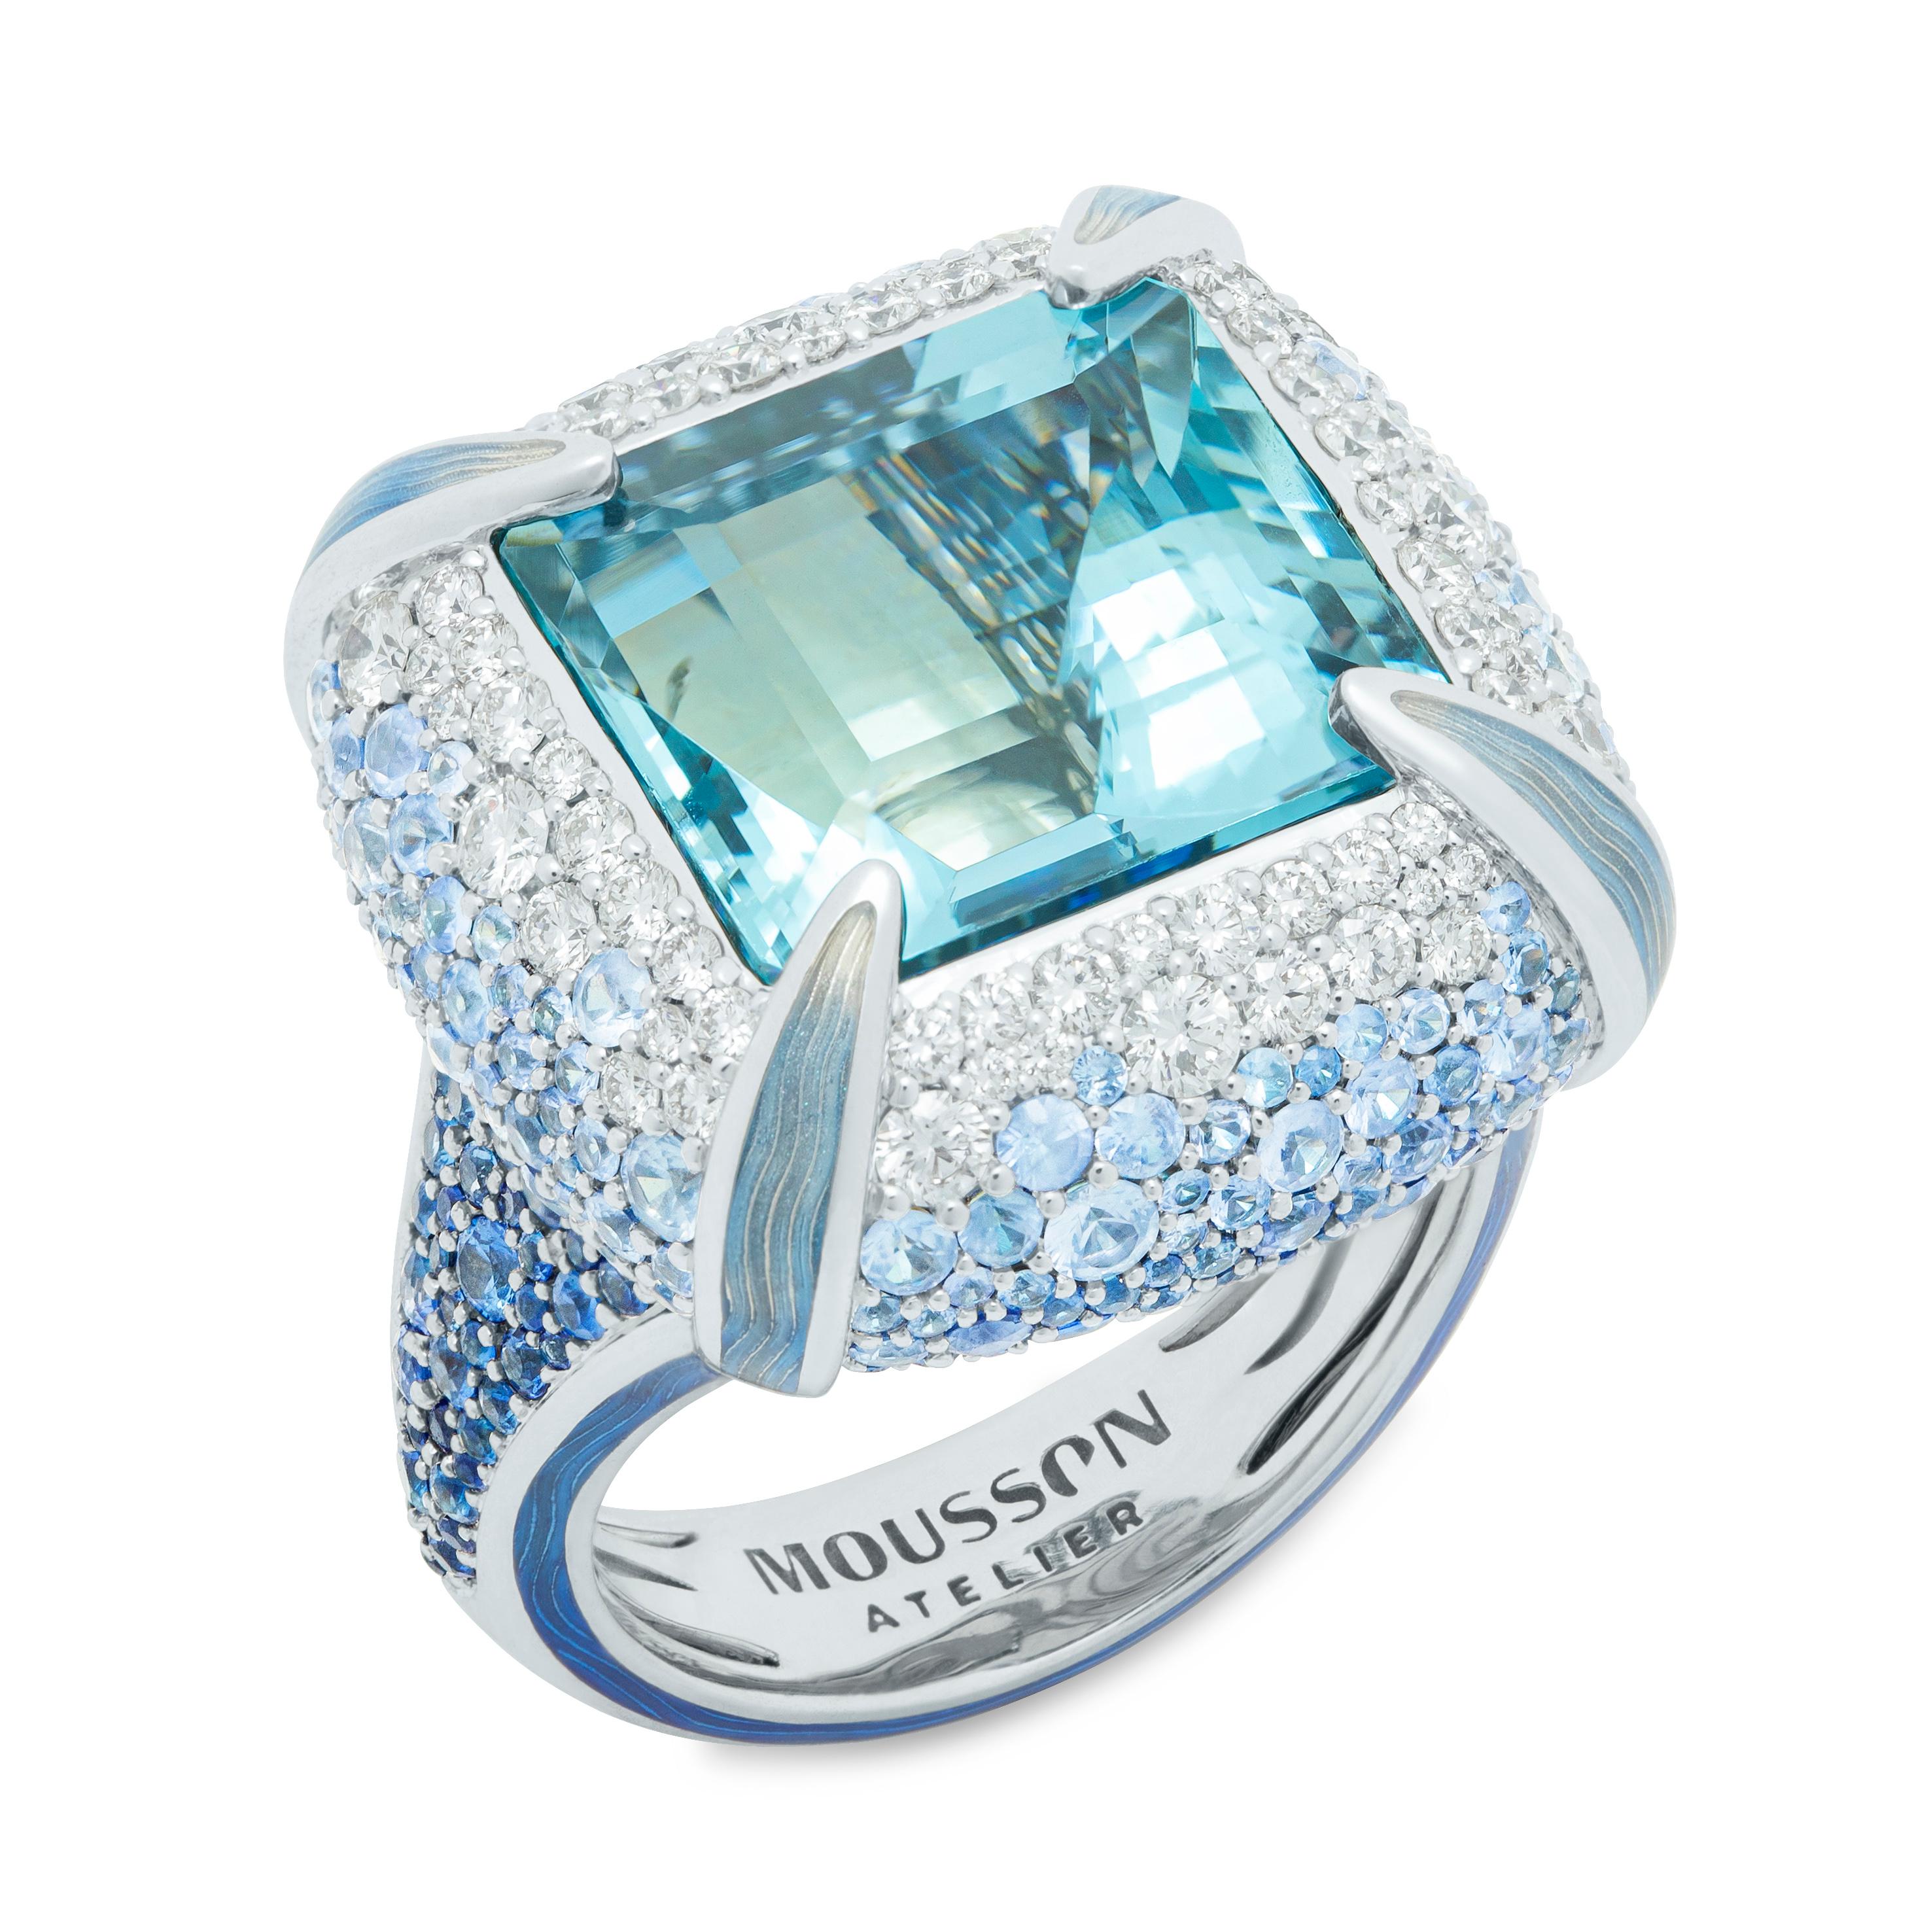 Aquamarine 11.39 Carat Diamonds Sapphires Enamel 18 Karat White Gold Ring
What images come to your mind when you see this Ring? It is a snow princess outfit or maybe melting ice? Whatever it is, the cold perfection in this is clearly visible, agree?